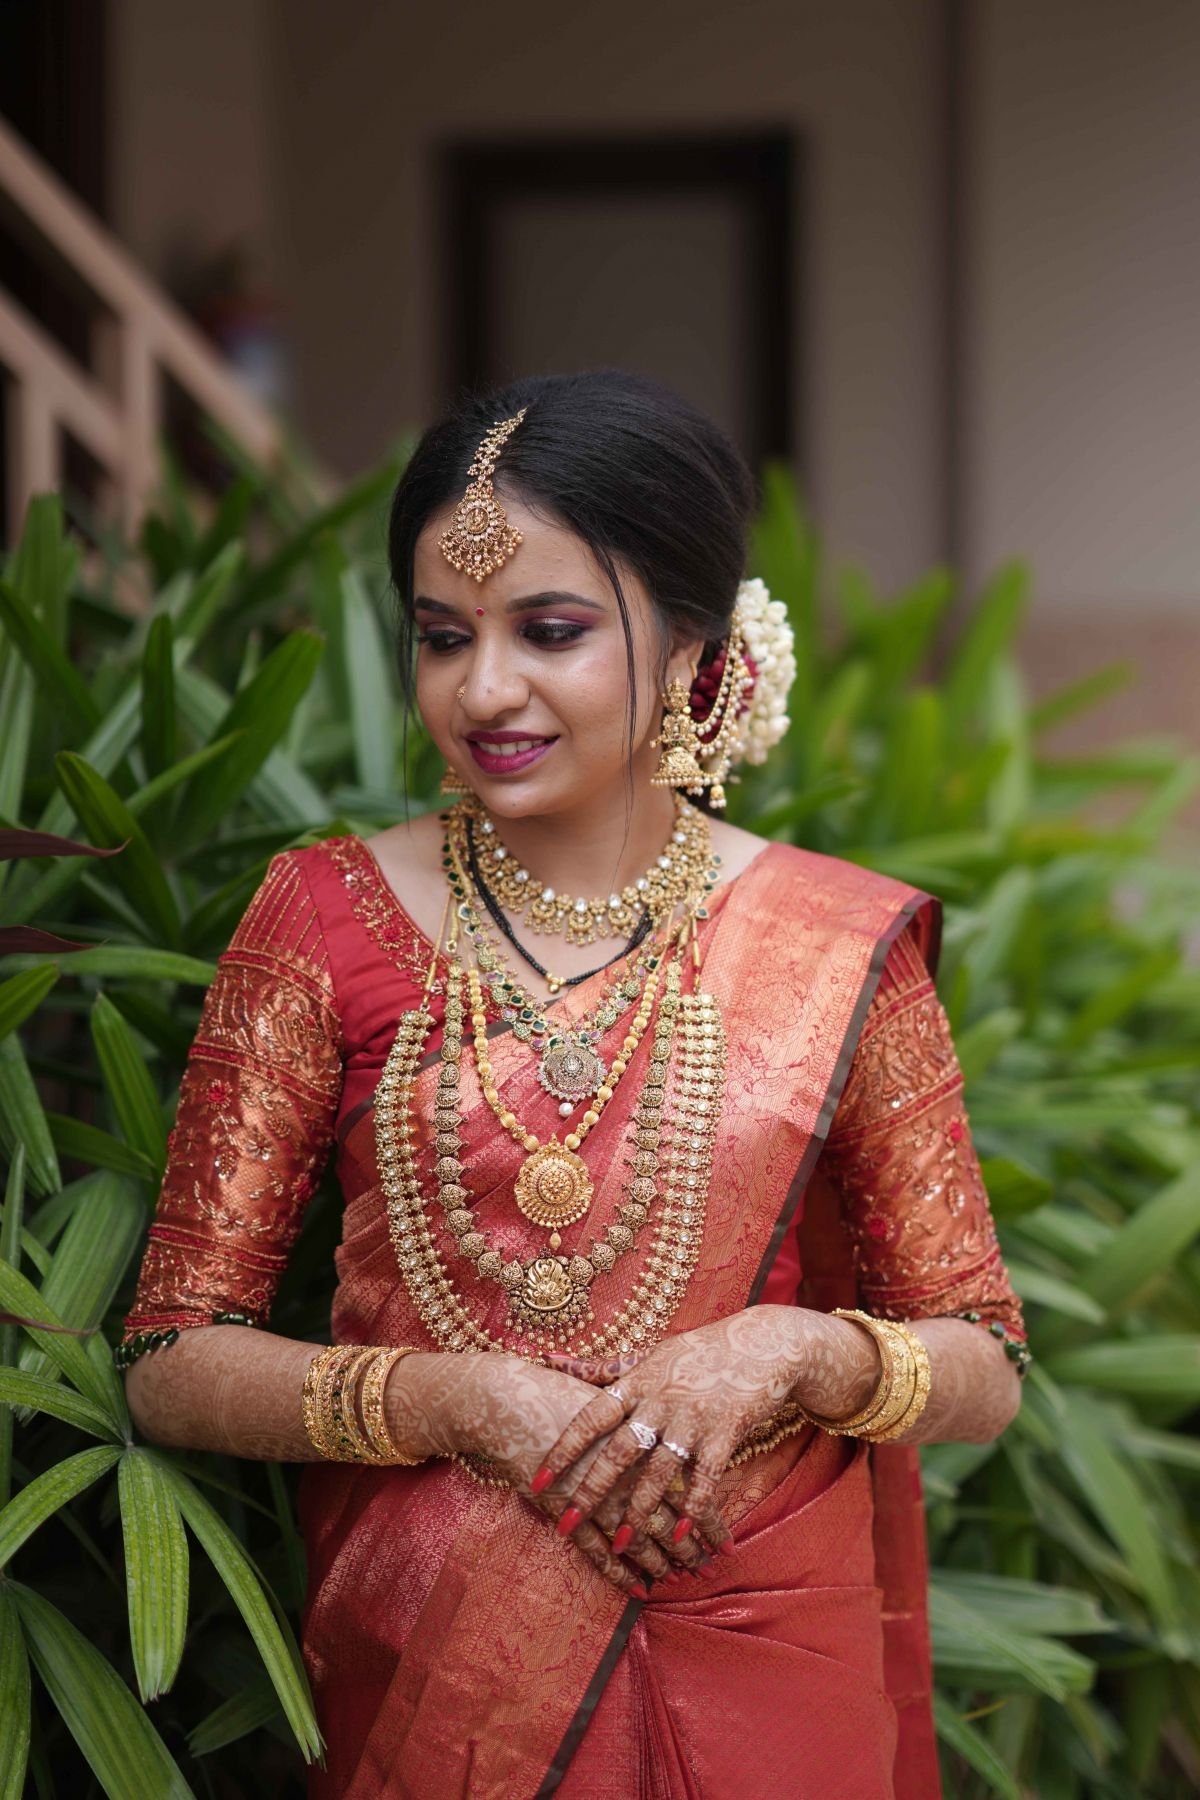 Dive Into The Colorful Traditions Of A Hindu Wedding Ceremony.